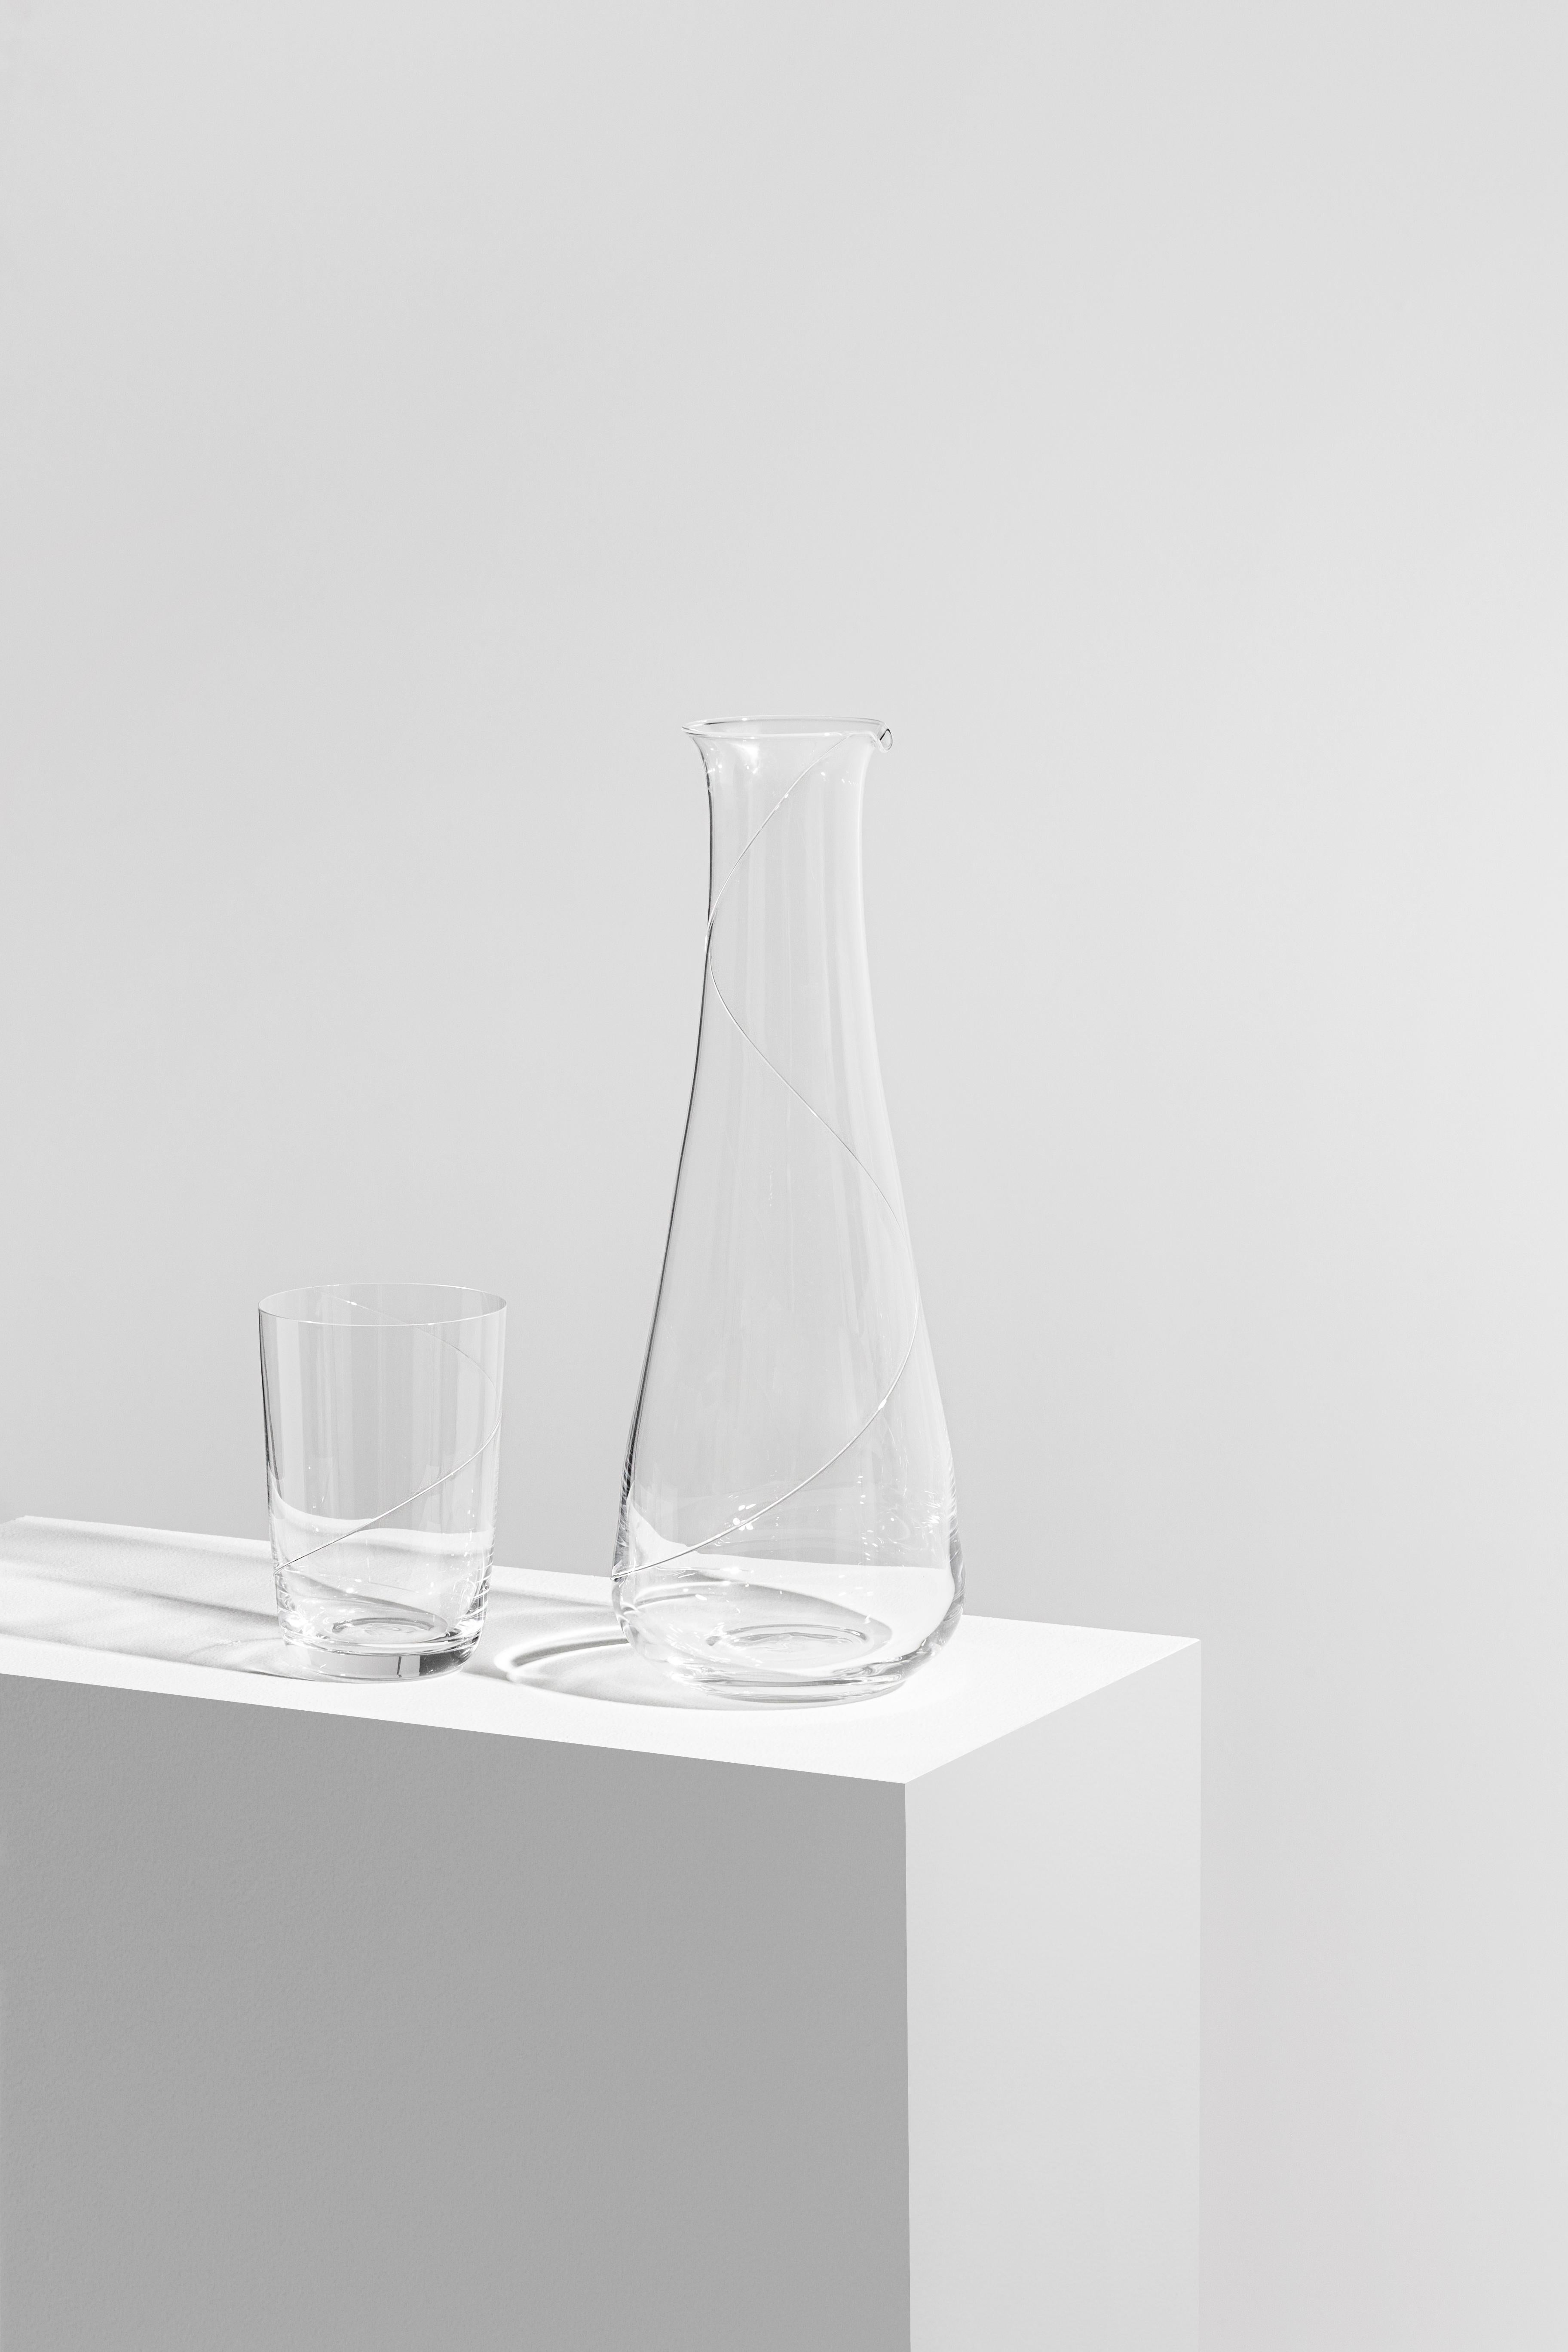 Line from Kosta Boda has been in production since 1982. The collection is unique, with a thread of spun glass applied on each product by hand – a symbol of high-quality Swedish craftsmanship from Kosta Glassworks. The mouth-blown carafe is an